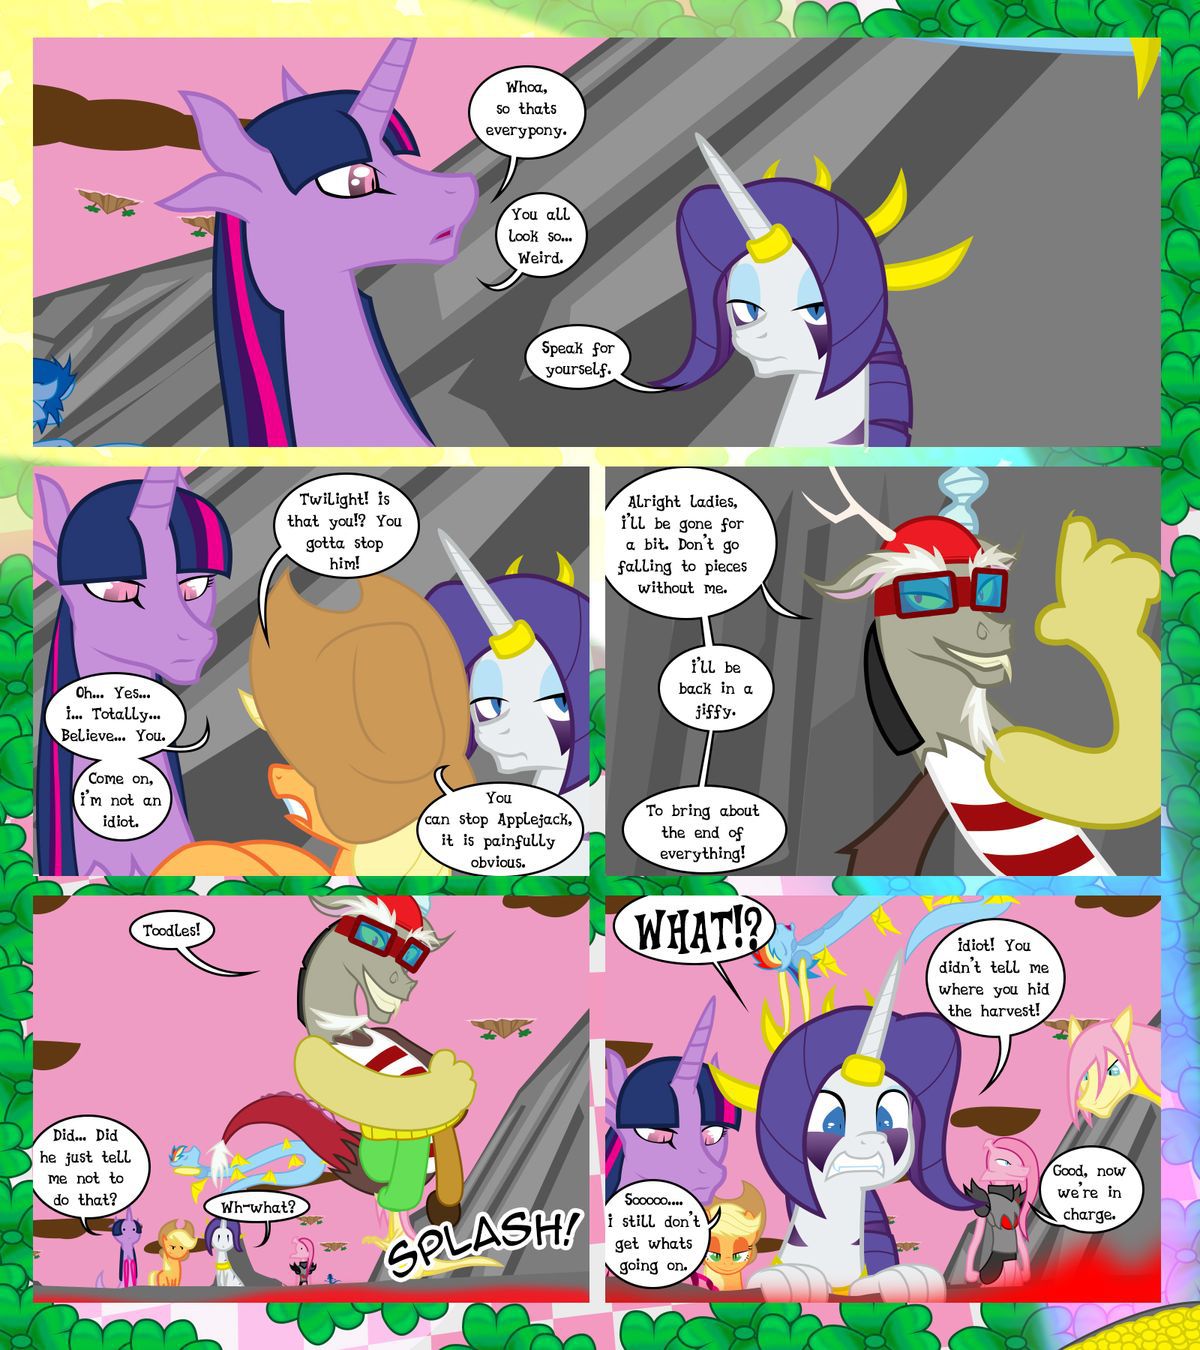 [GatesMcCloud] Cutie Mark Crusaders 10k: Chapter 3 - The Lost (My Little Pony: Friendship is Magic) [English] [Ongoing] 18